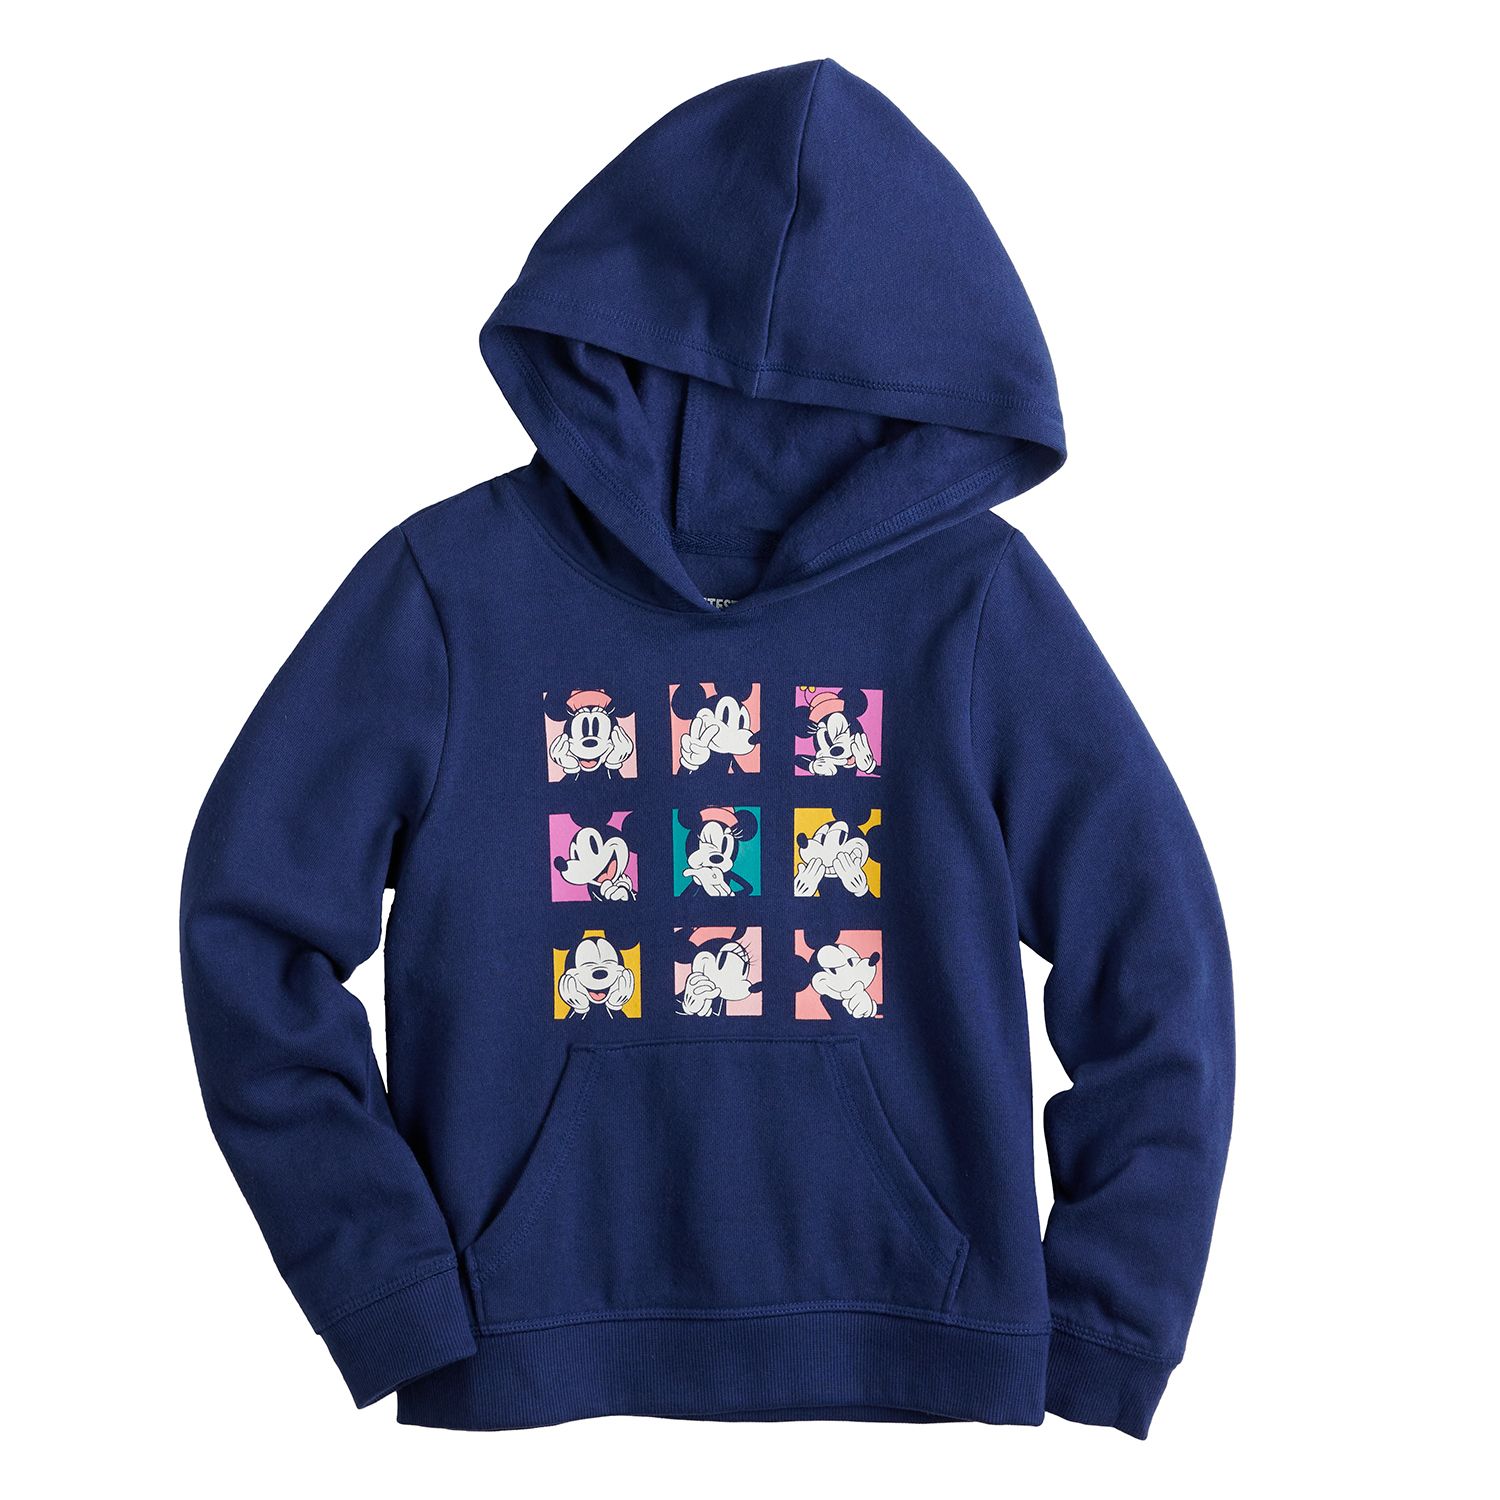 Image for Disney/Jumping Beans Disney's Mickey & Minnie Mouse Girls 4-12 Pullover by Jumping Beans® at Kohl's.